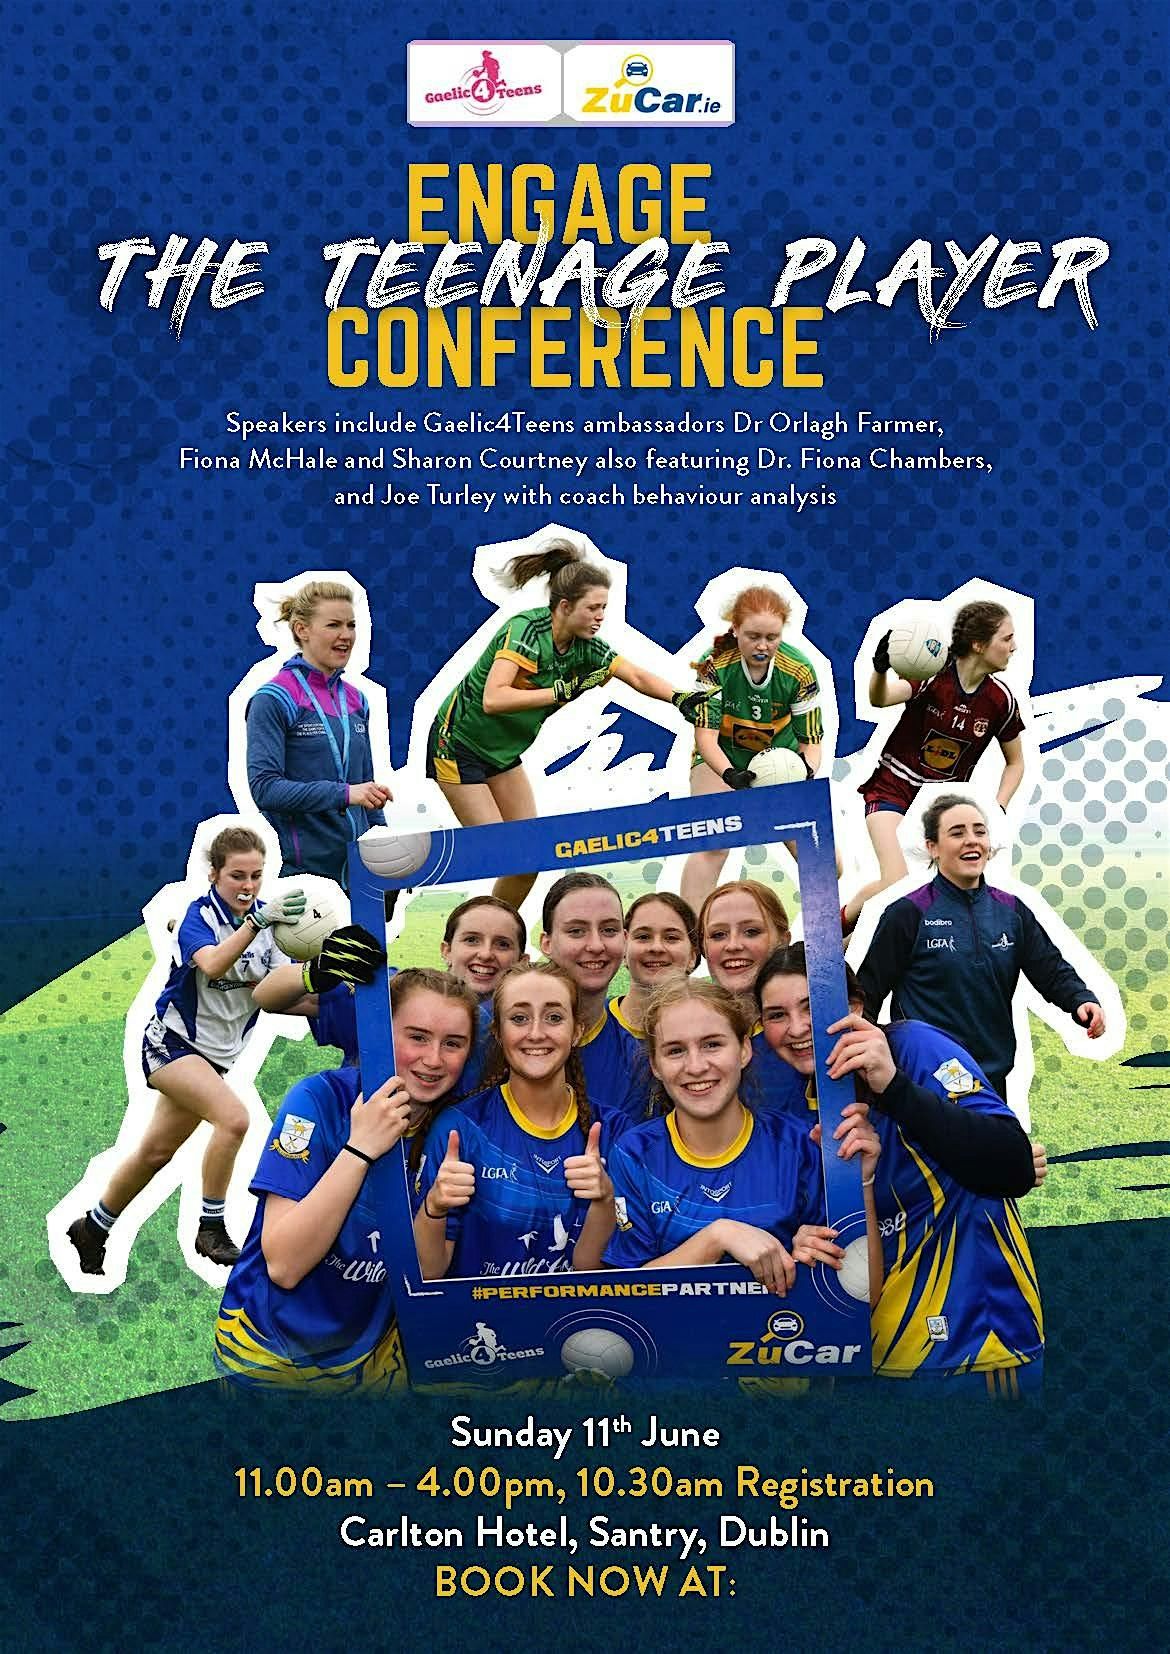 Engage The Teenage Player Conference - Understanding the Bigger Picture